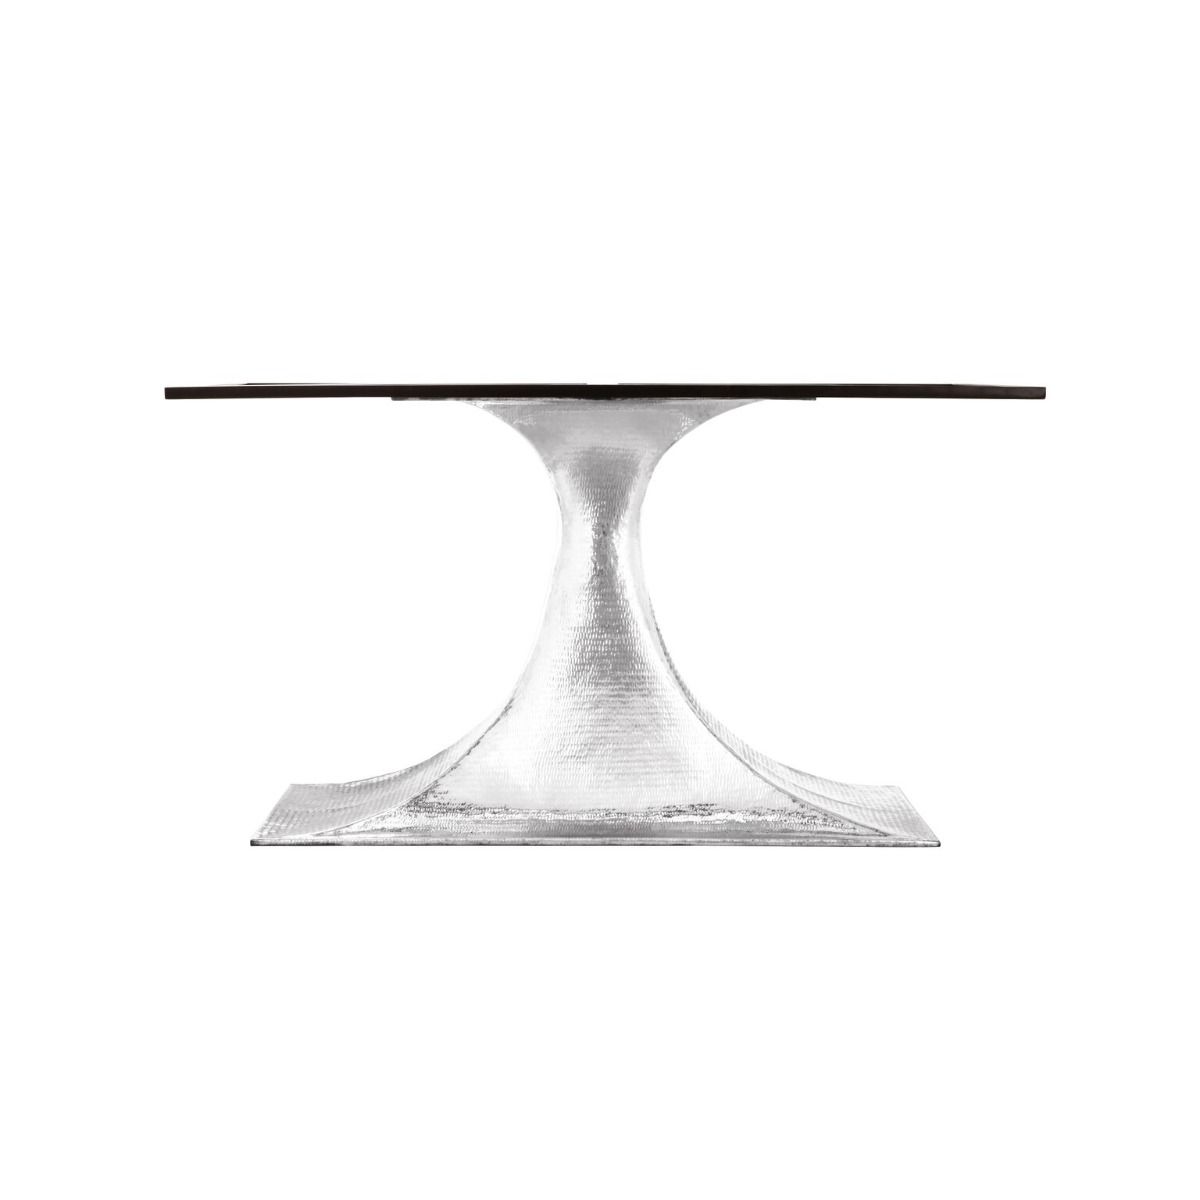 Load image into Gallery viewer, Stockholm Small Oval Table Base NickelTable Bungalow 5  Nickel   Four Hands, Burke Decor, Mid Century Modern Furniture, Old Bones Furniture Company, Old Bones Co, Modern Mid Century, Designer Furniture, https://www.oldbonesco.com/
